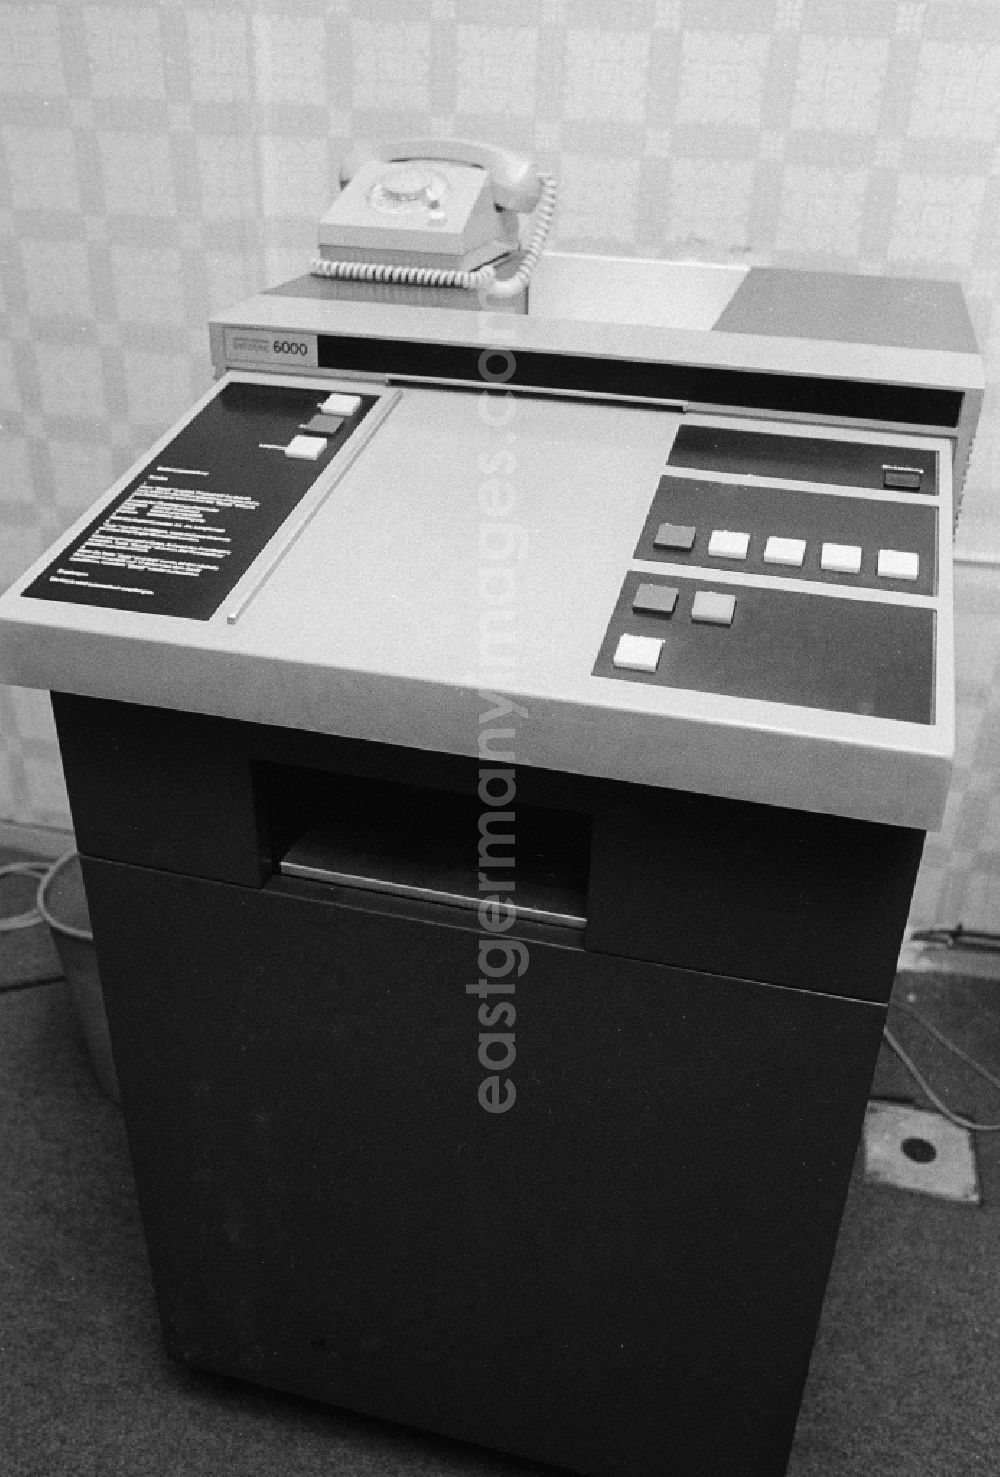 GDR picture archive: Berlin - An Infotec 600